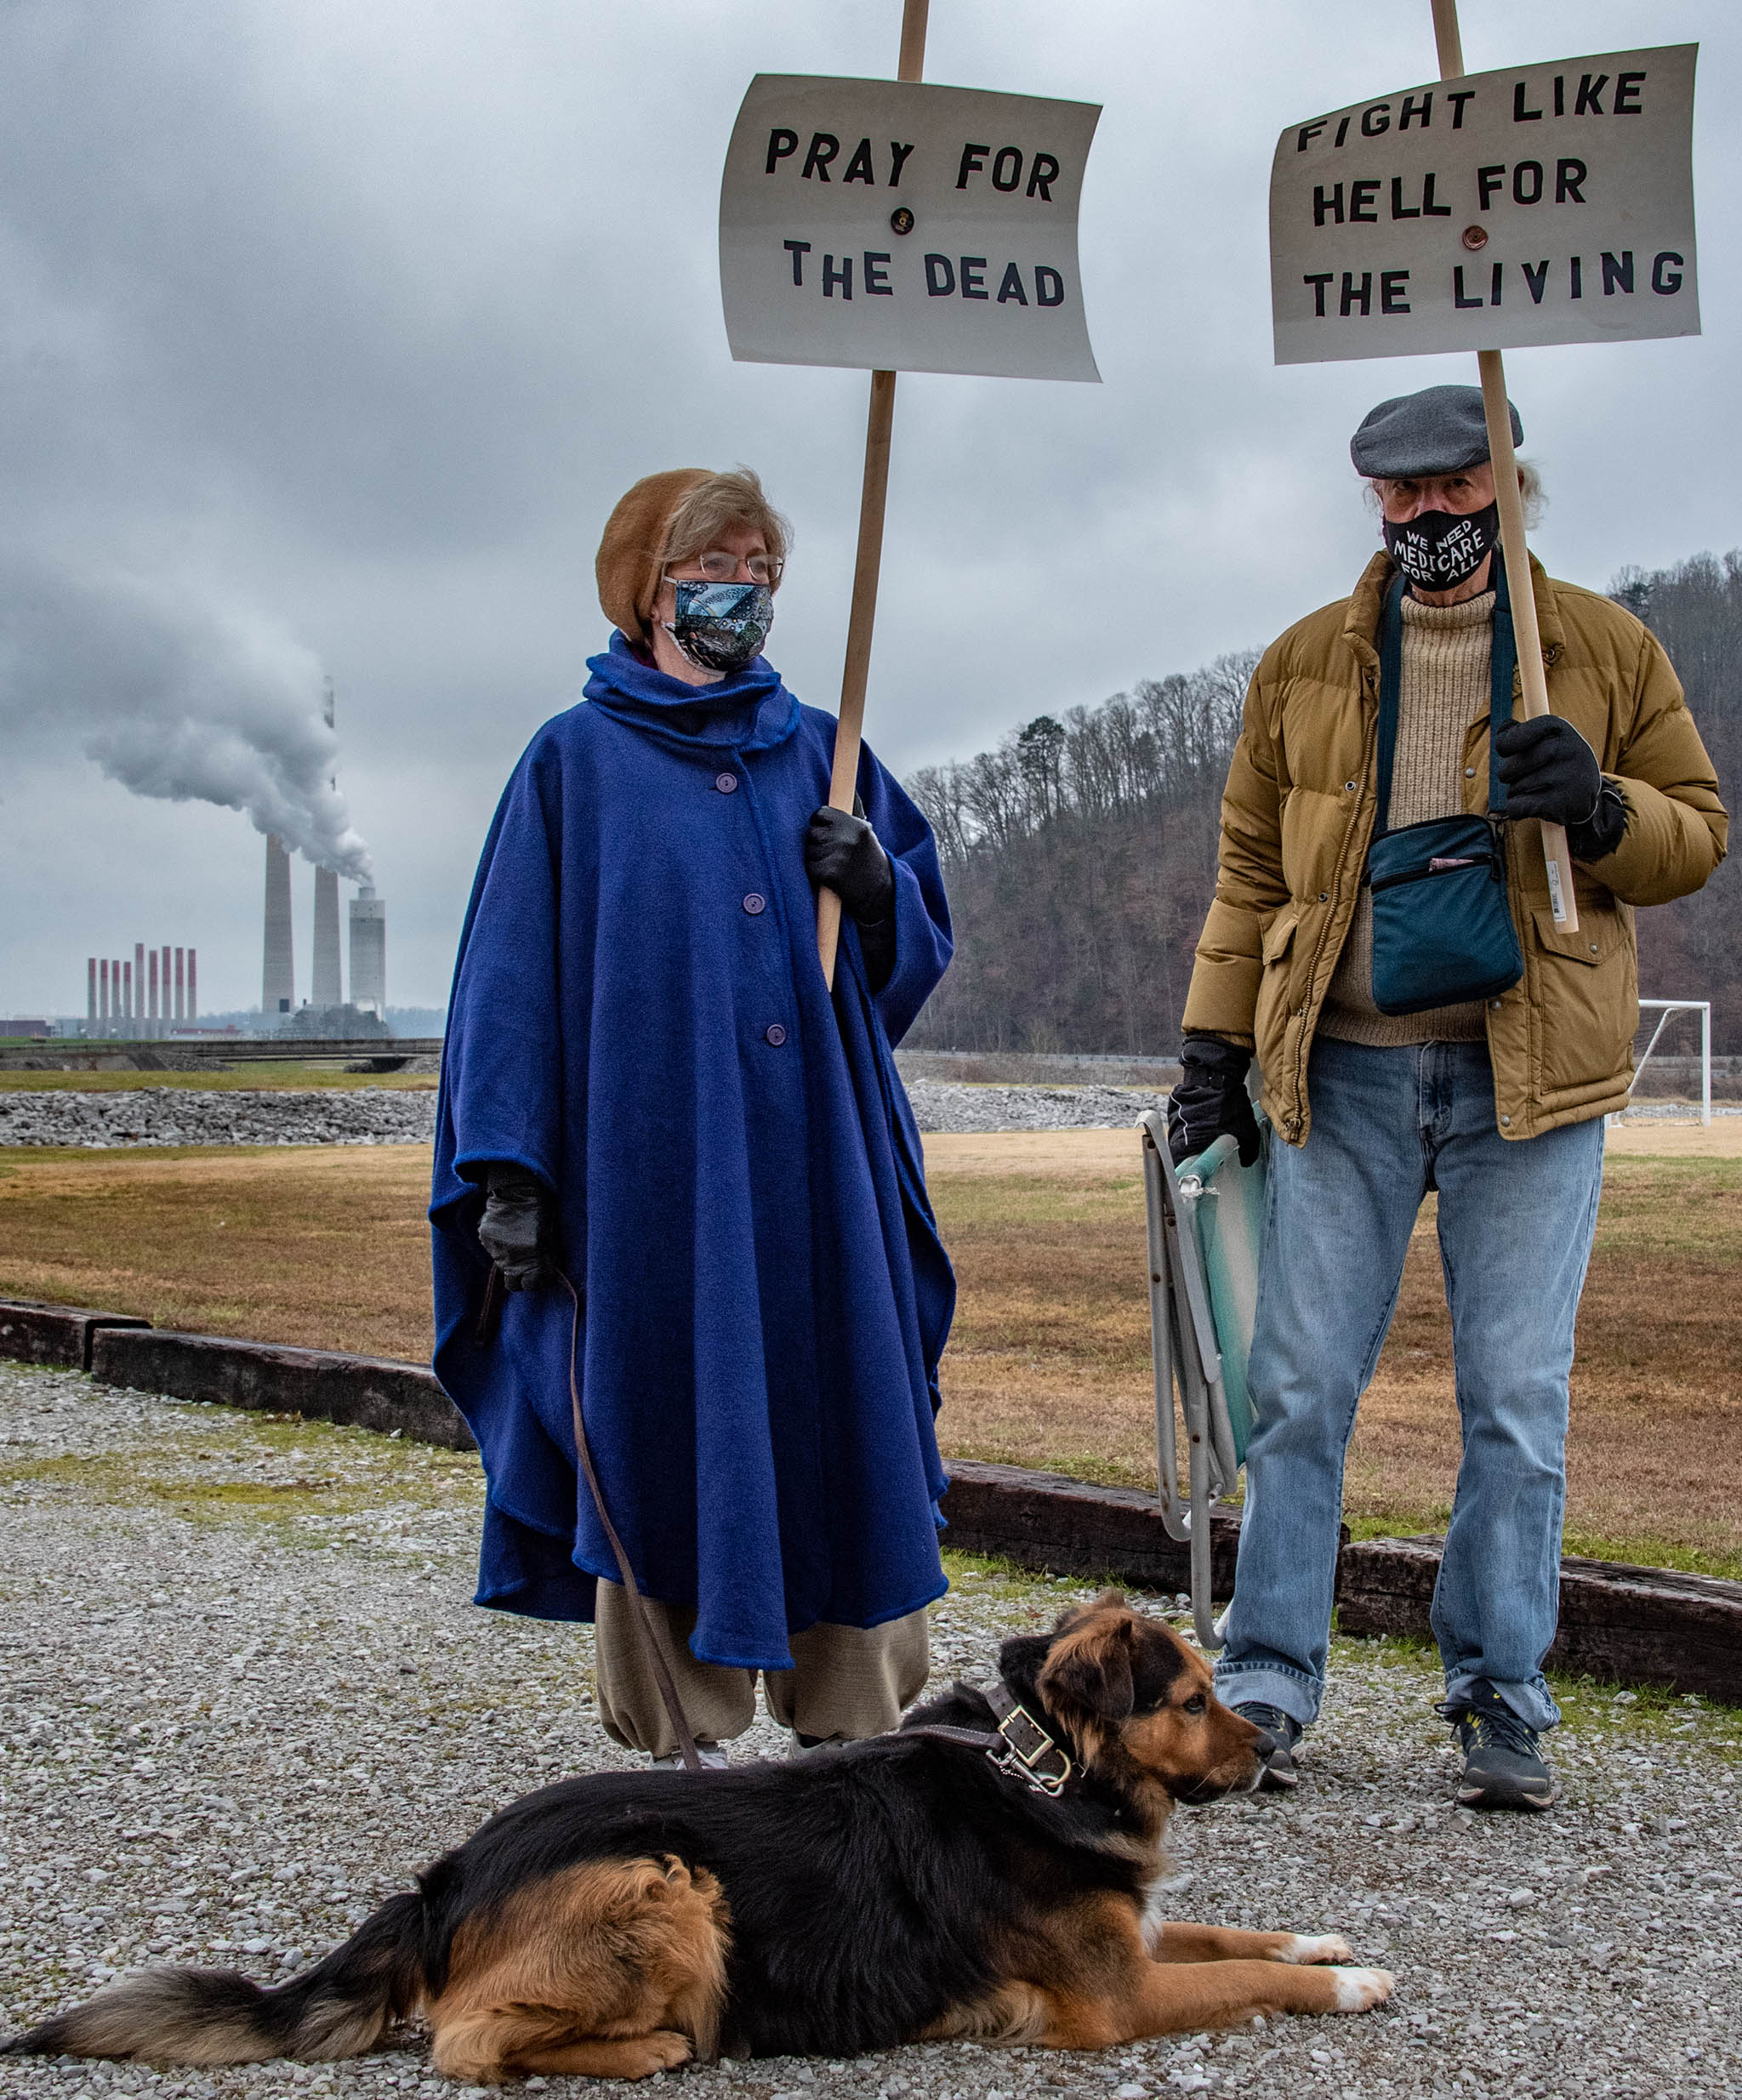 A man and woman hold signs that say "Pray for the dead" and "Fight like hell for the living" outside of the Kingston coal-fired power plant